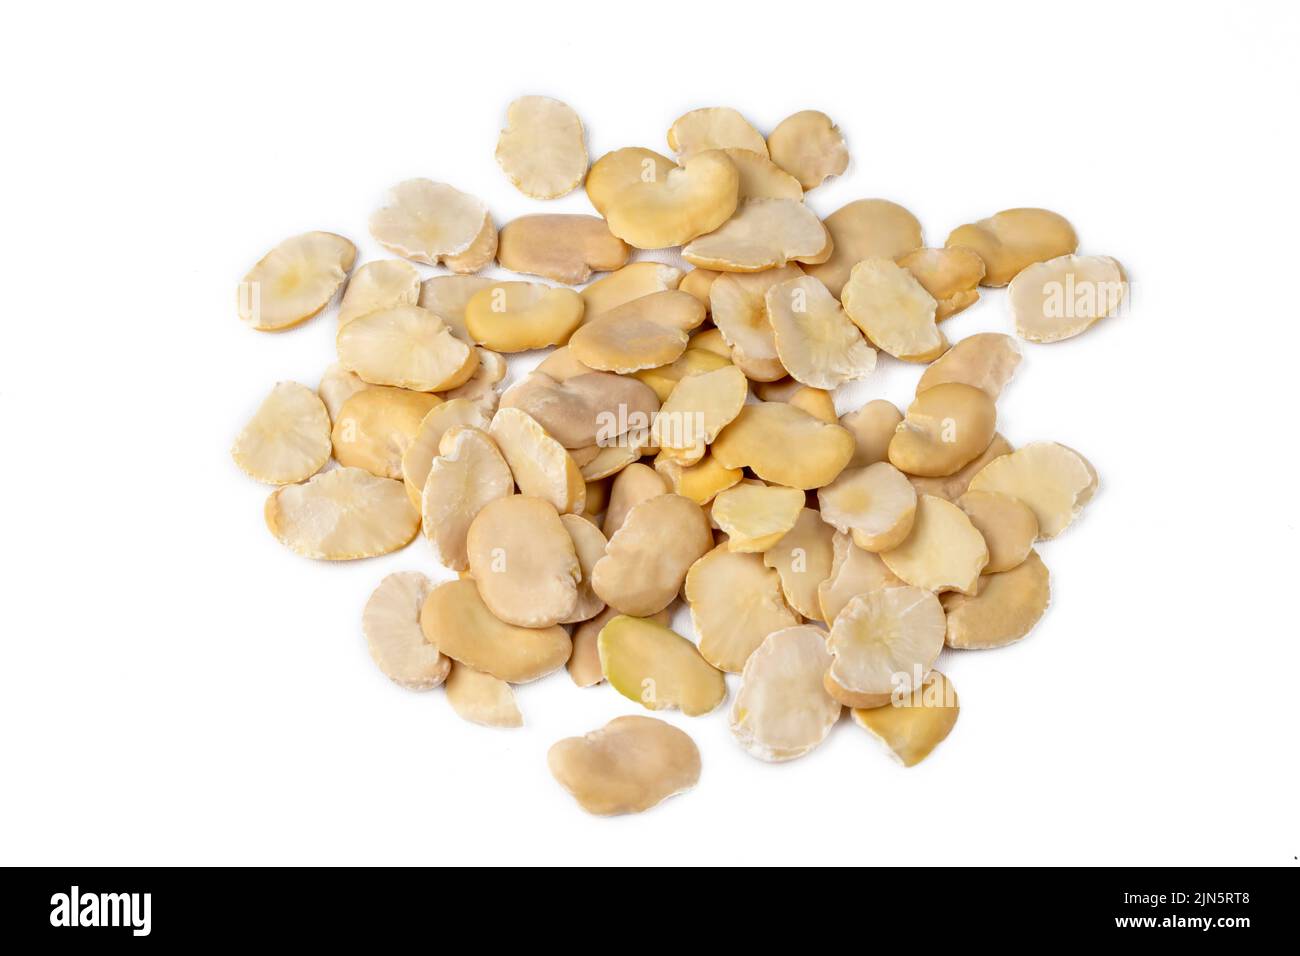 Dried broad bean on the white background Stock Photo